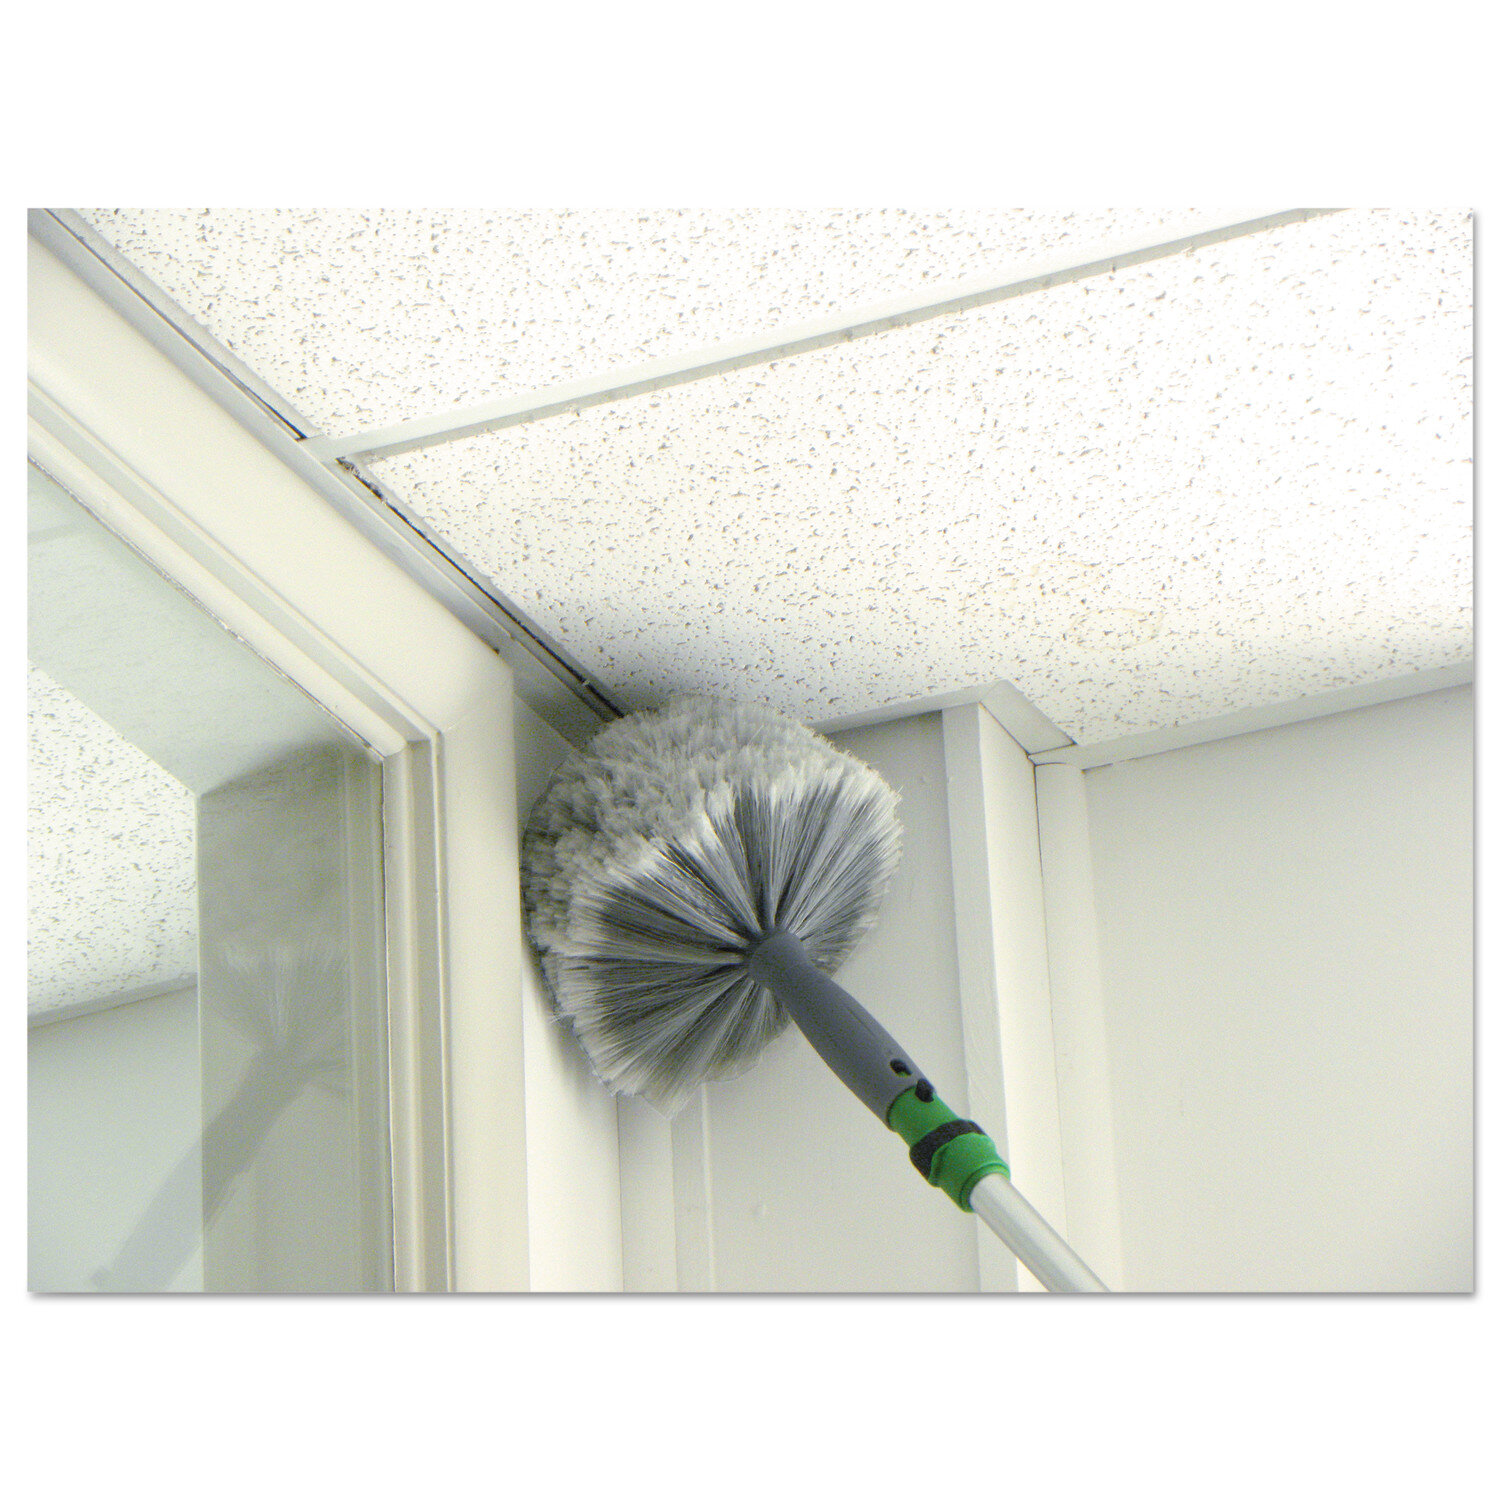 High Ceiling Cleaning Equipment - Unger USA - Commercial Cleaning